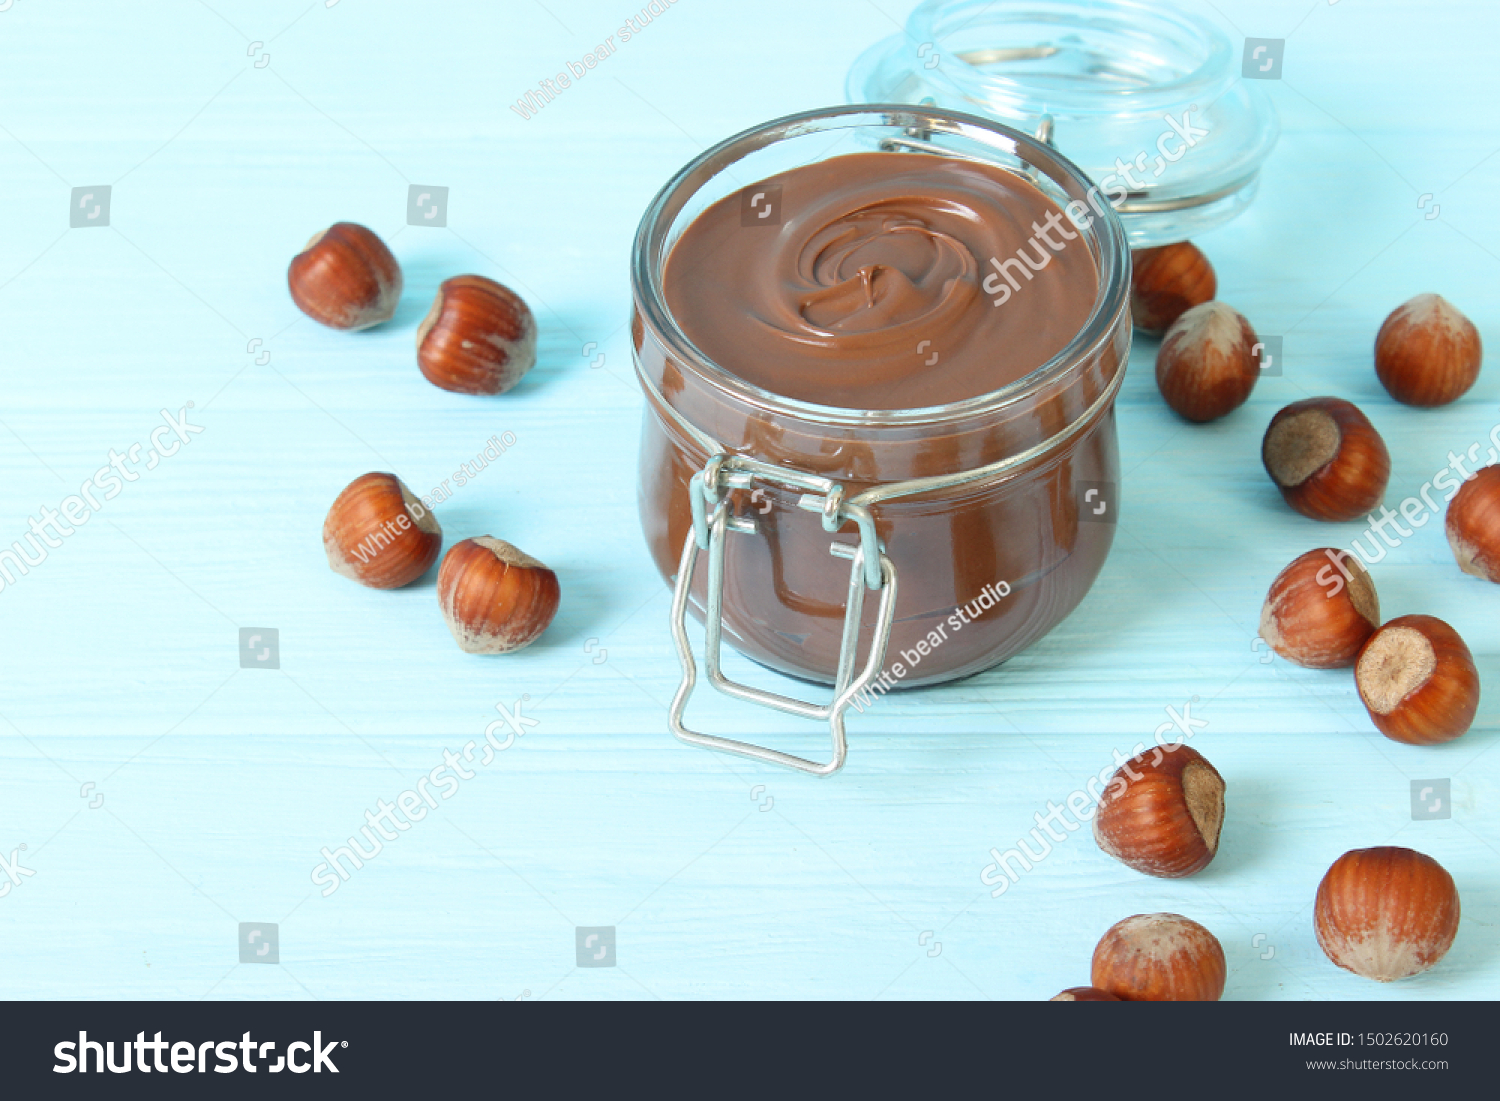 Download Chocolate Paste Glass Jar On Colored Royalty Free Stock Image PSD Mockup Templates